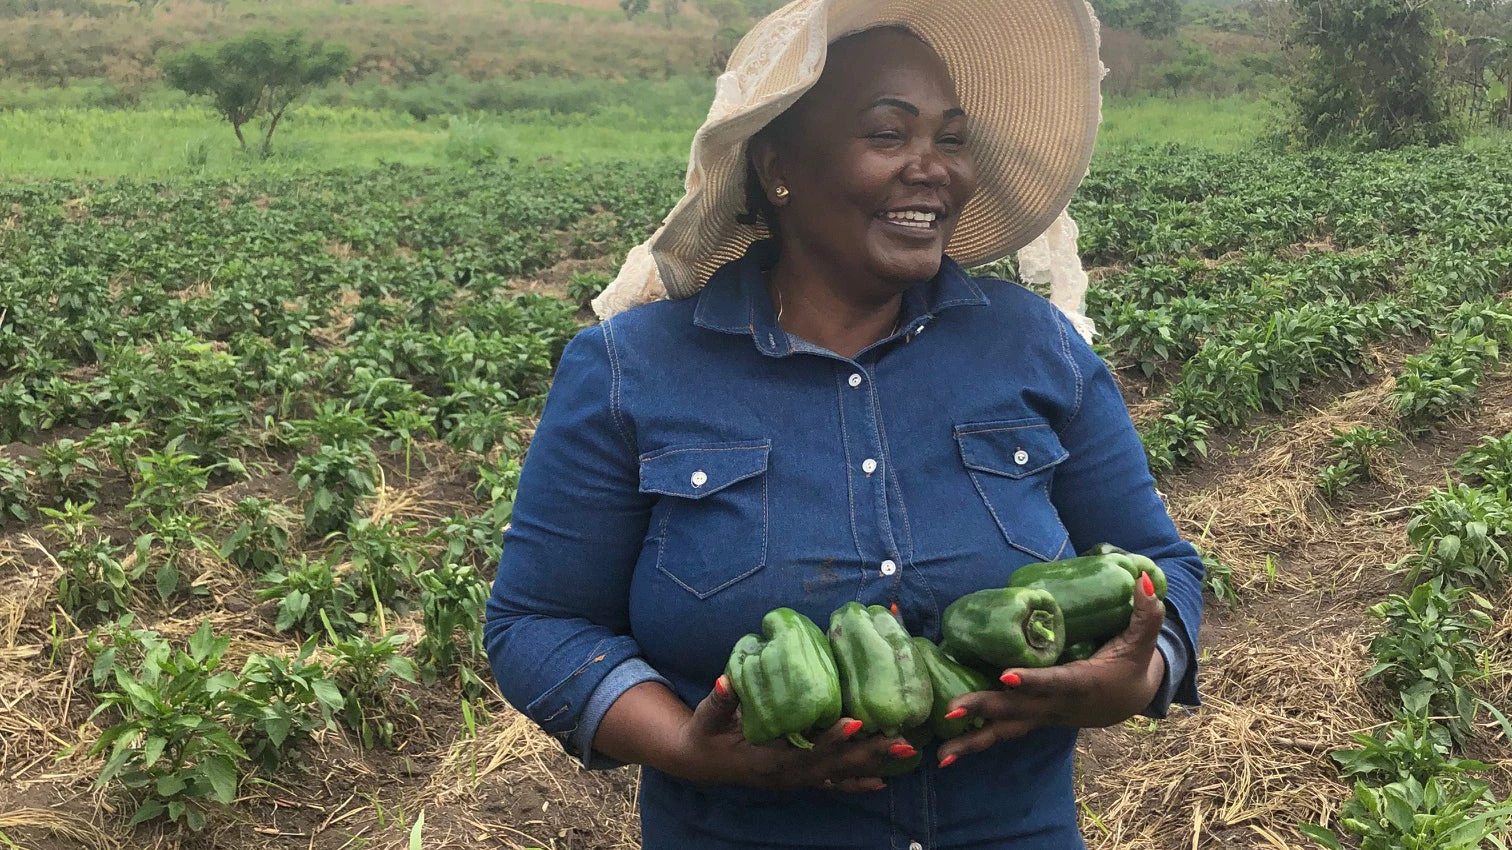 Florinda Chilumbo, a farmer who has 200 hectares planted with fruits and vegetables. Photo credit: Diego Arias Carballo